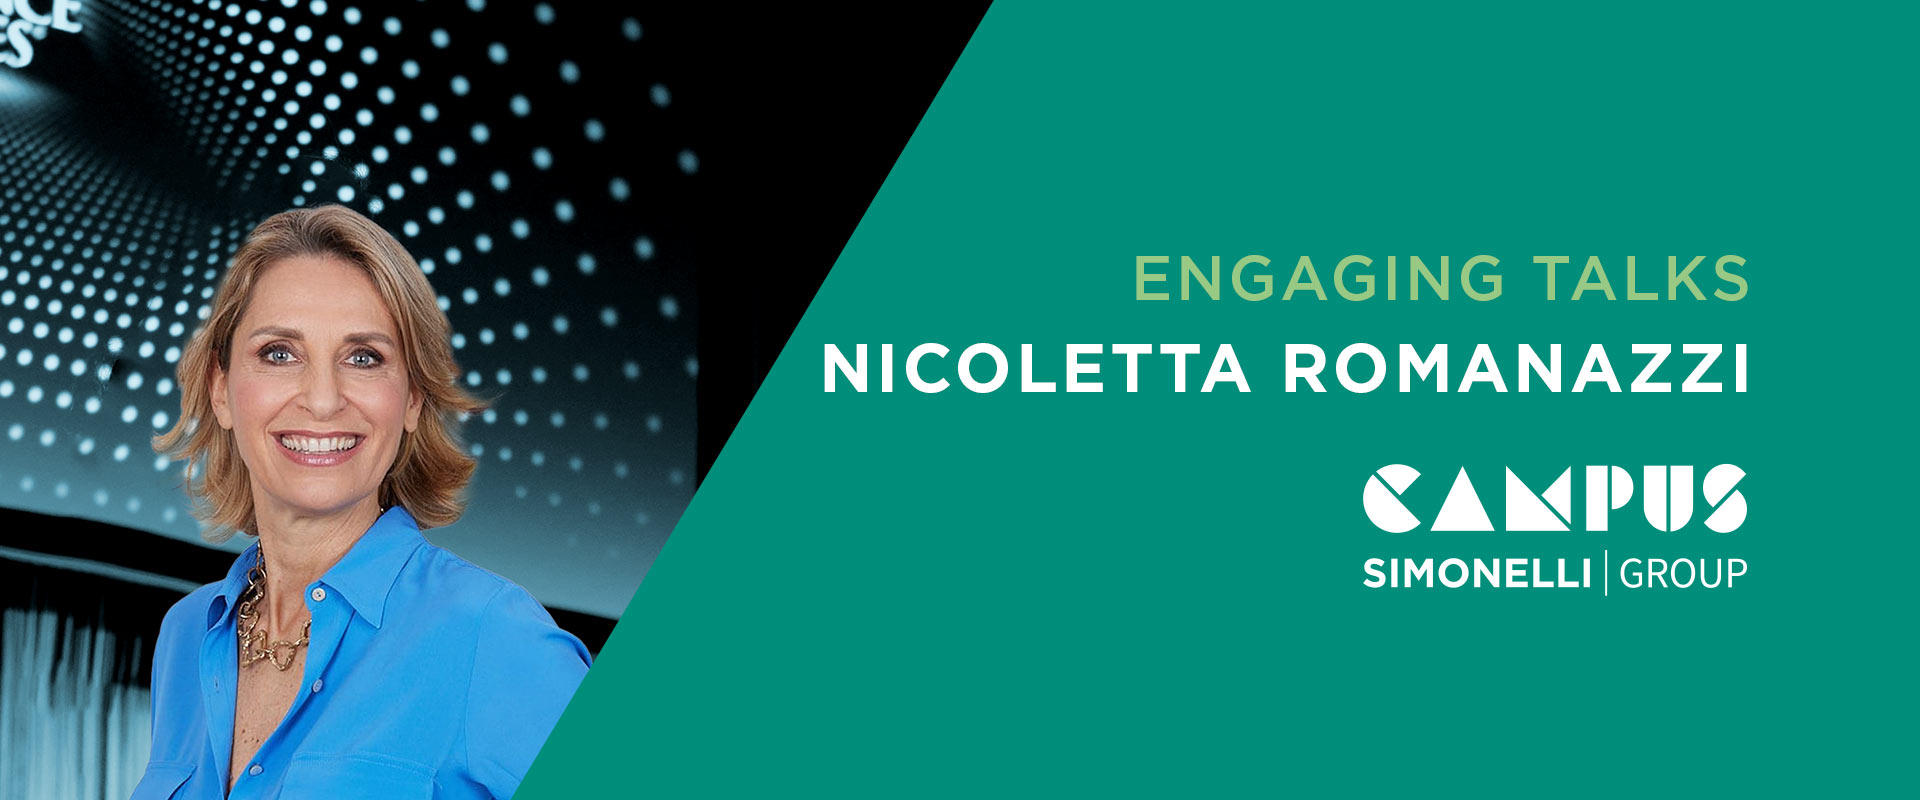 The second appointment of the Engaging Talks format will host Nicoletta Romanazzi